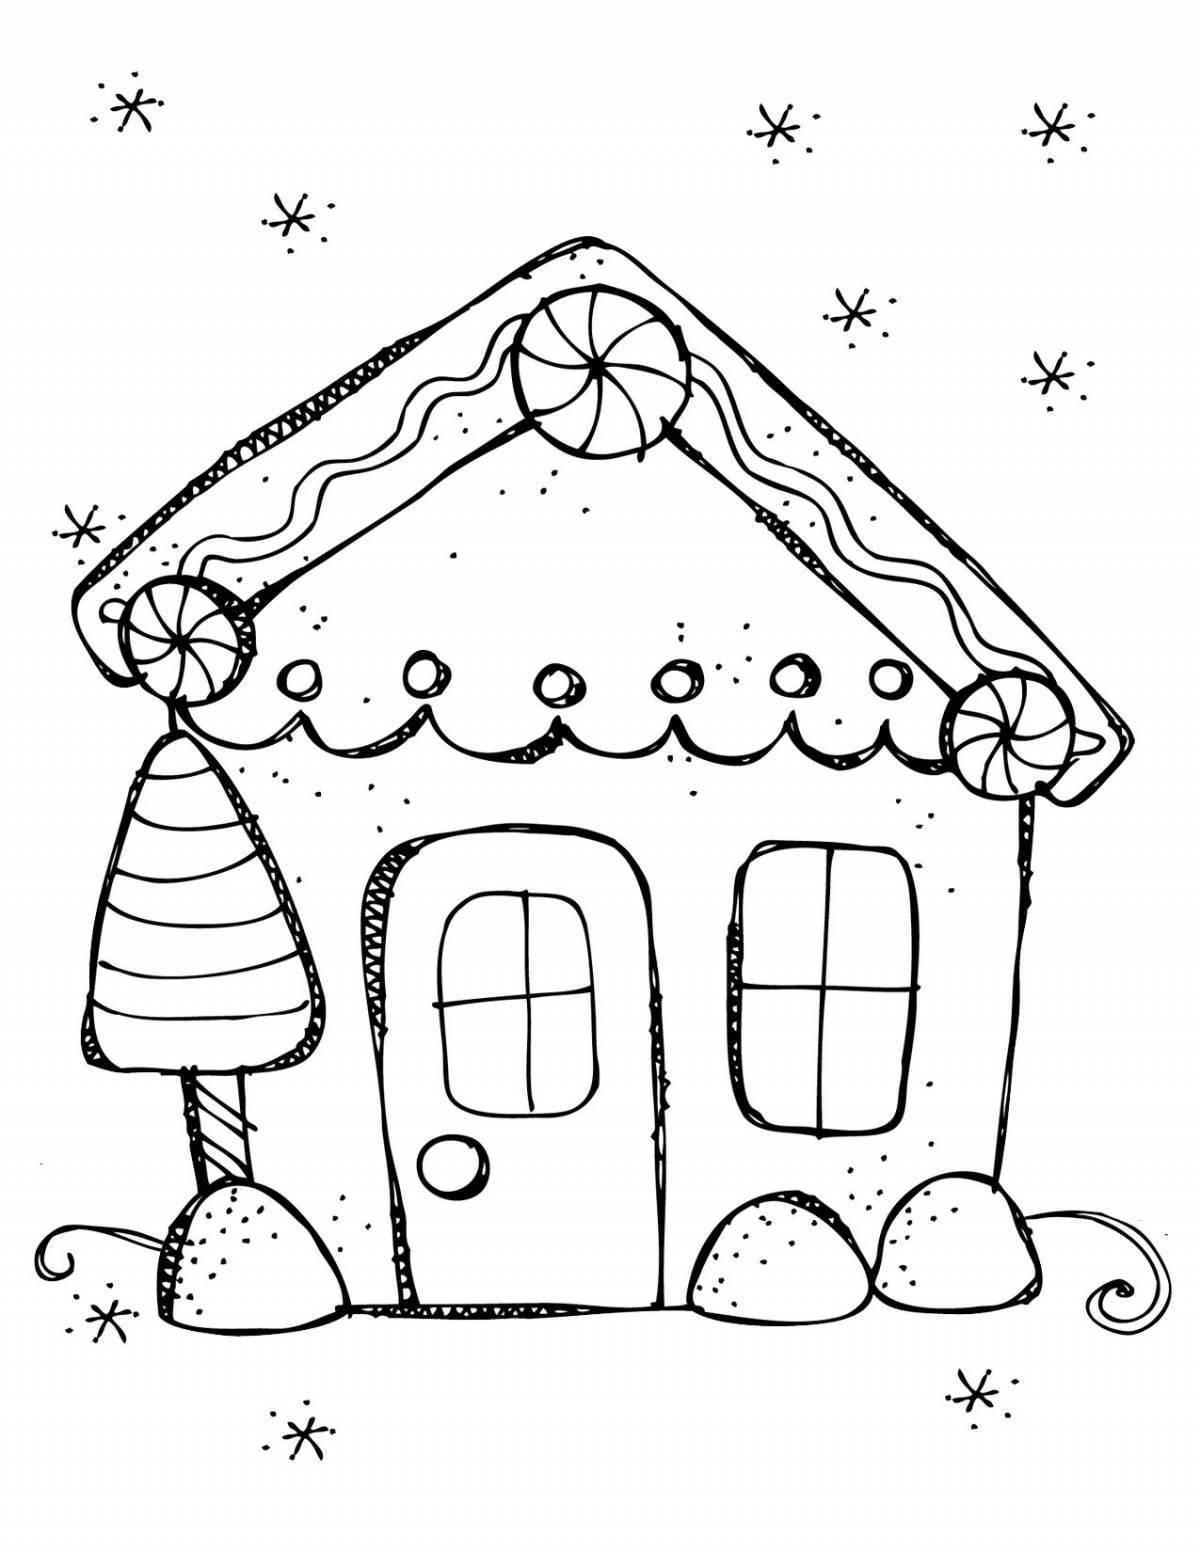 Exquisite fairytale gingerbread house coloring book